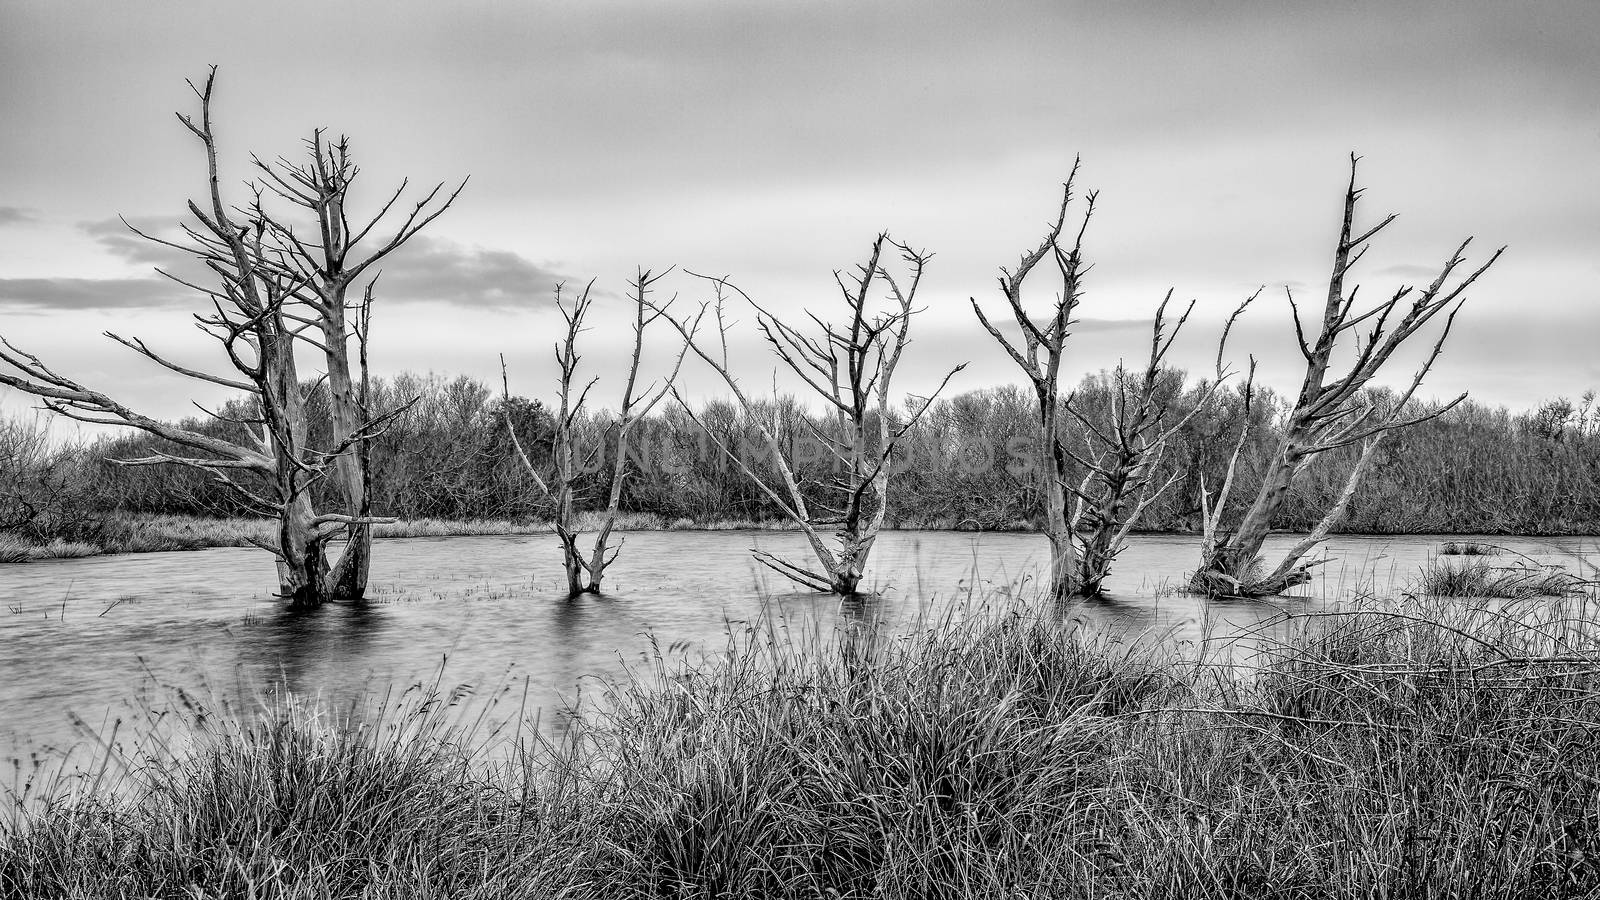 Dead Trees Flooded in Water by backyard_photography